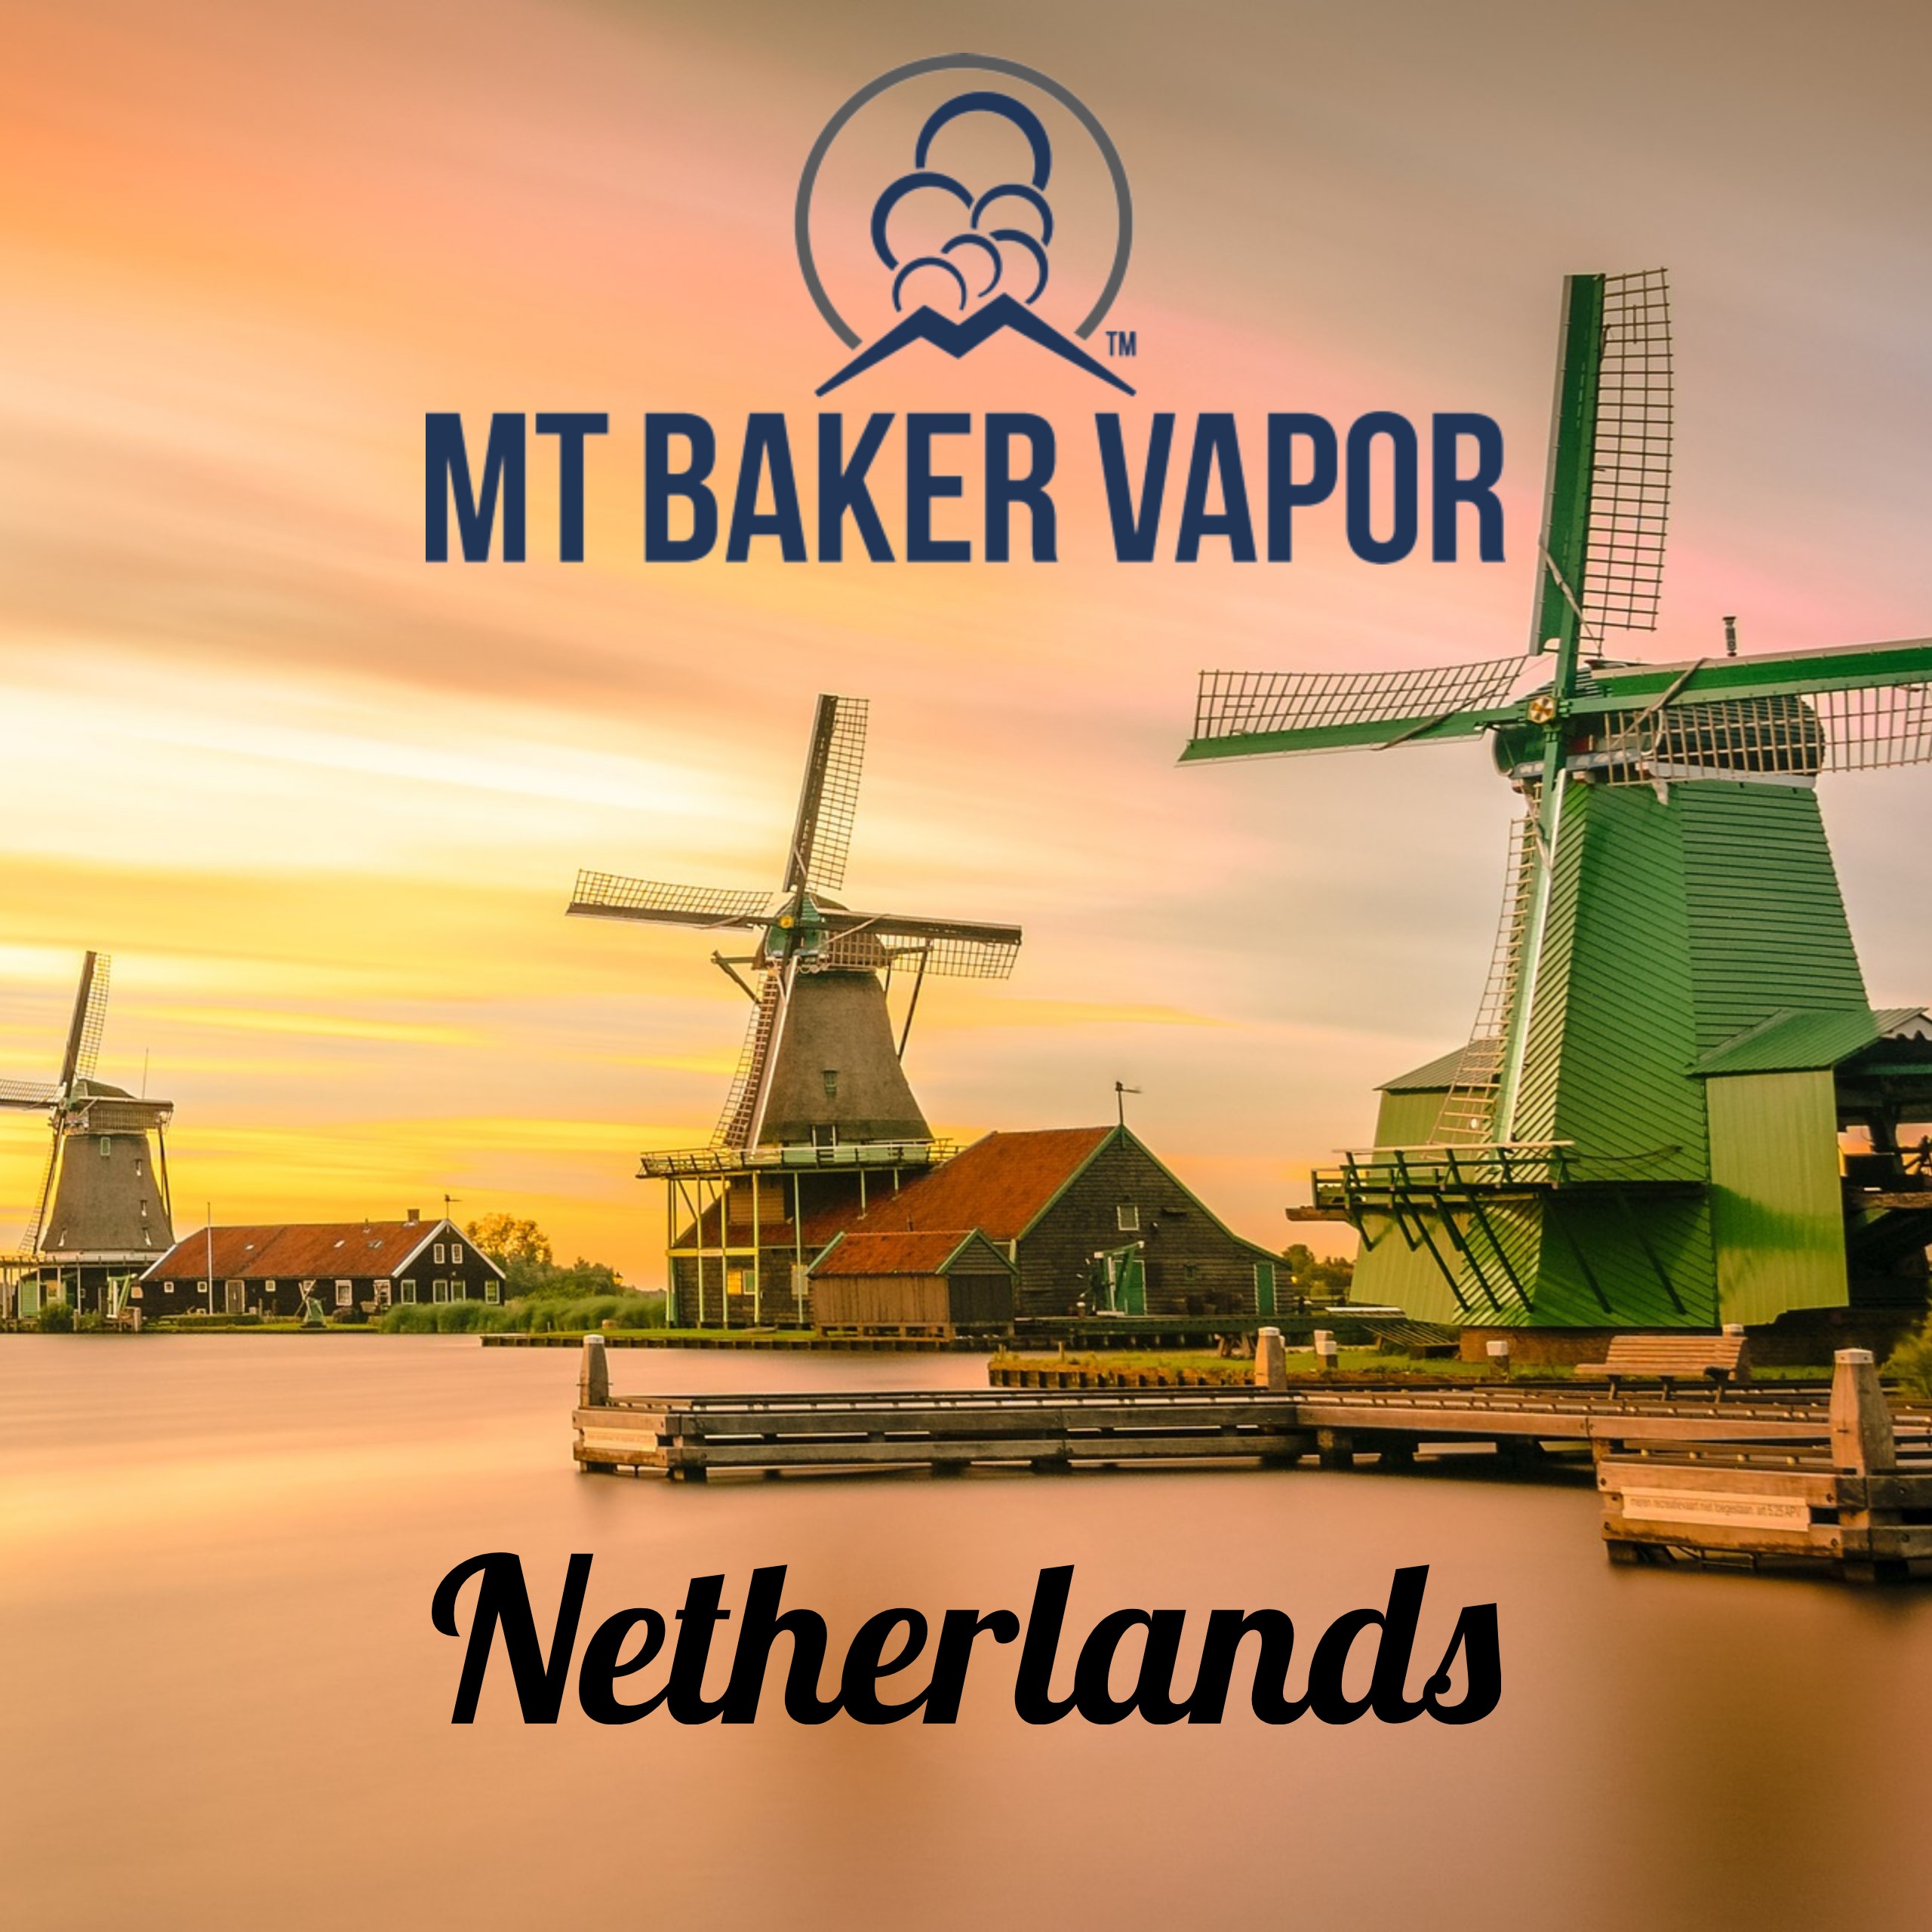 Mt Baker Vapor in the Netherlands. How to Get Your E-Juice in Holland